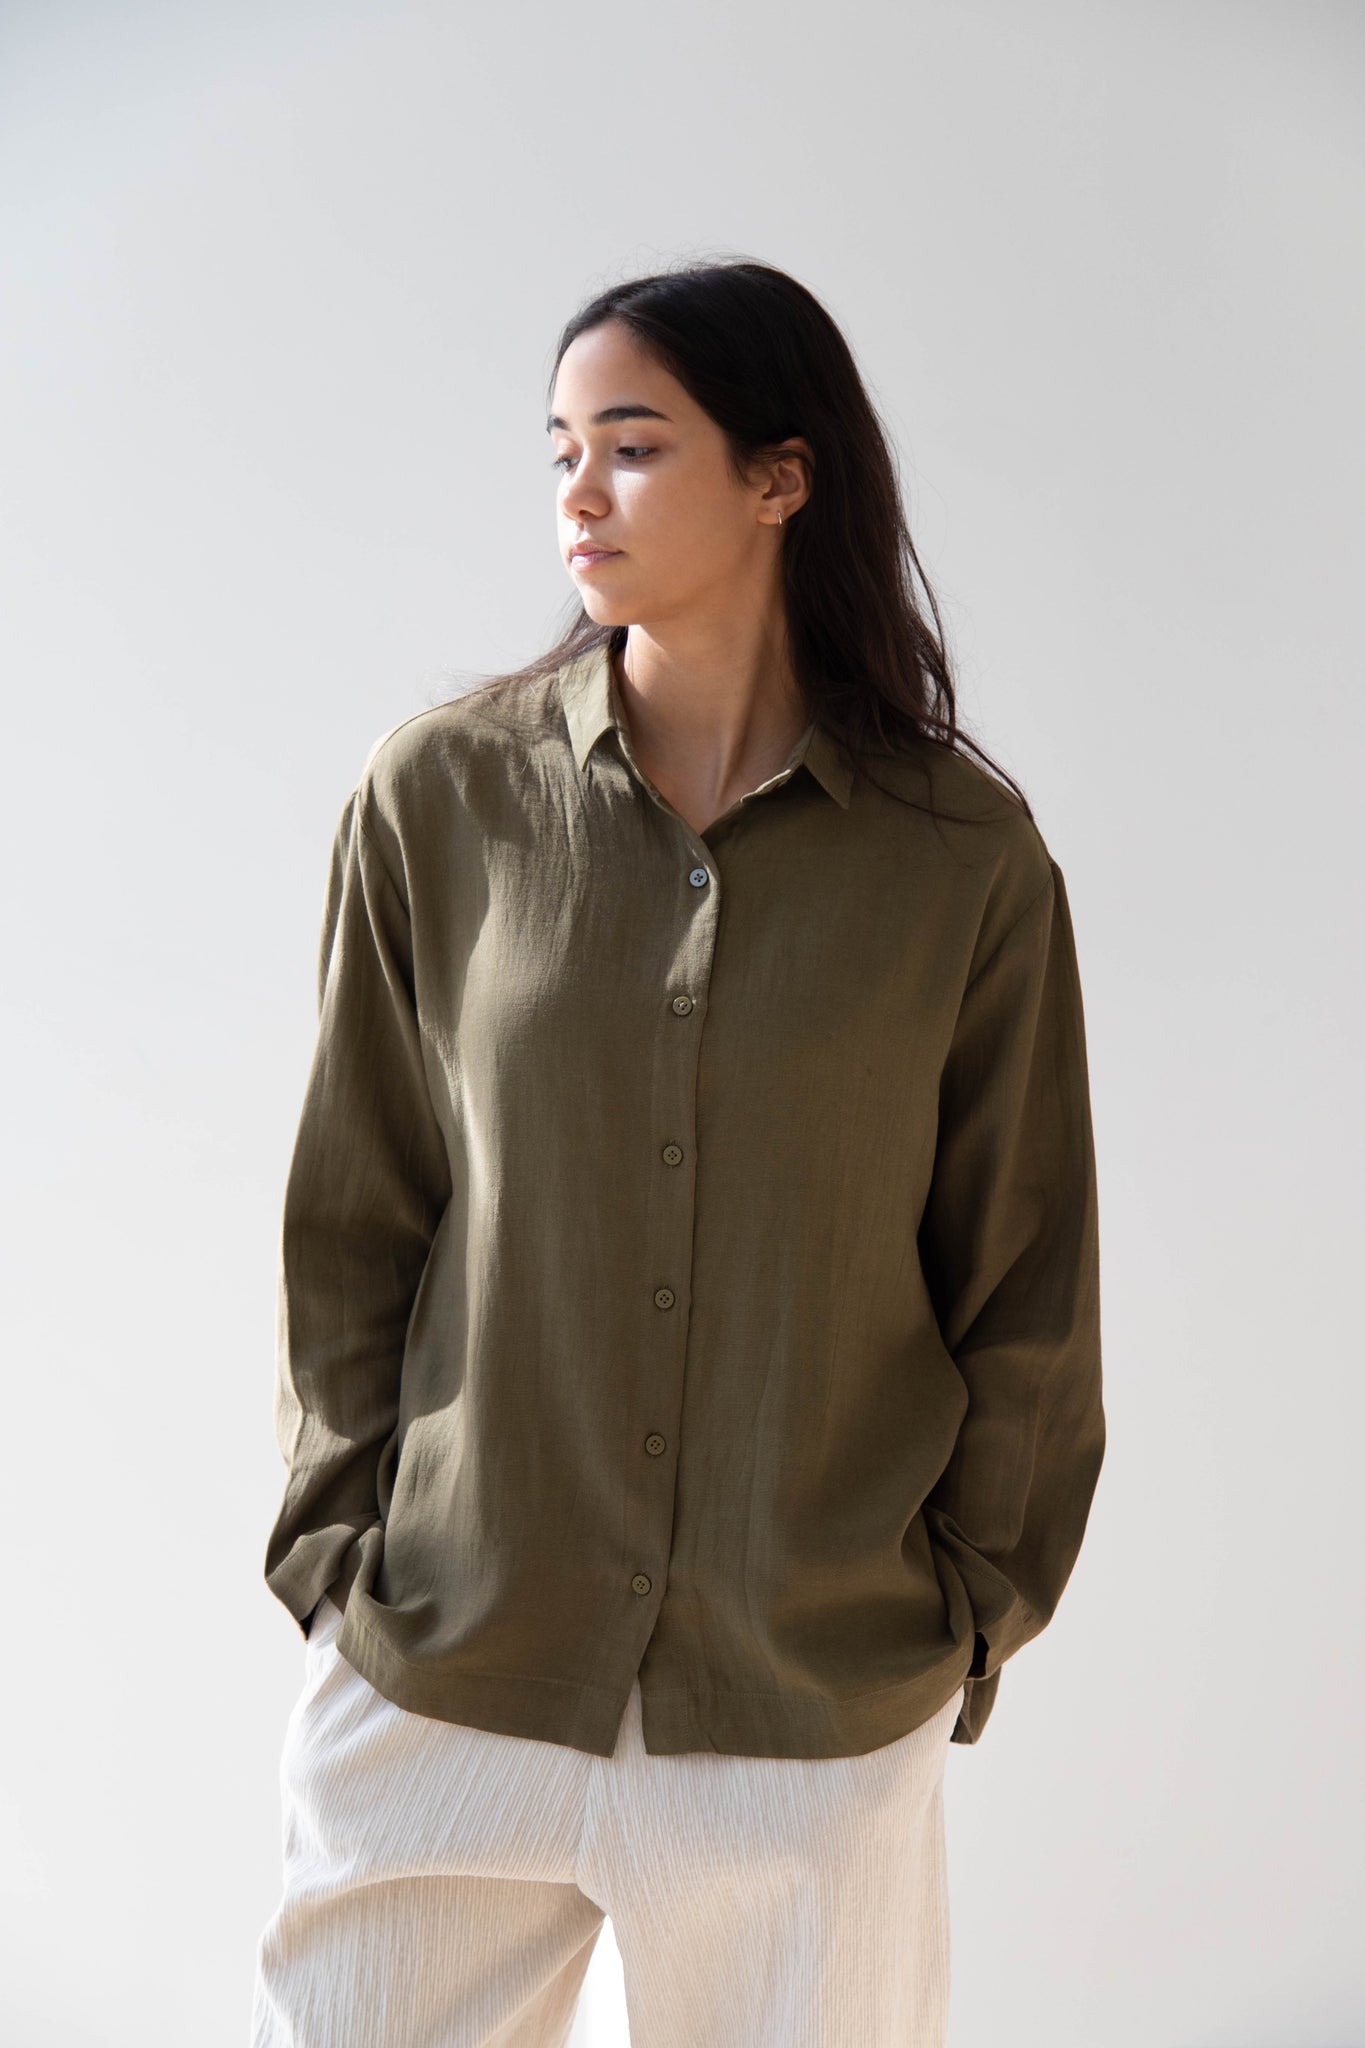 RB by Runaway Bicycle Nao Top in Olive